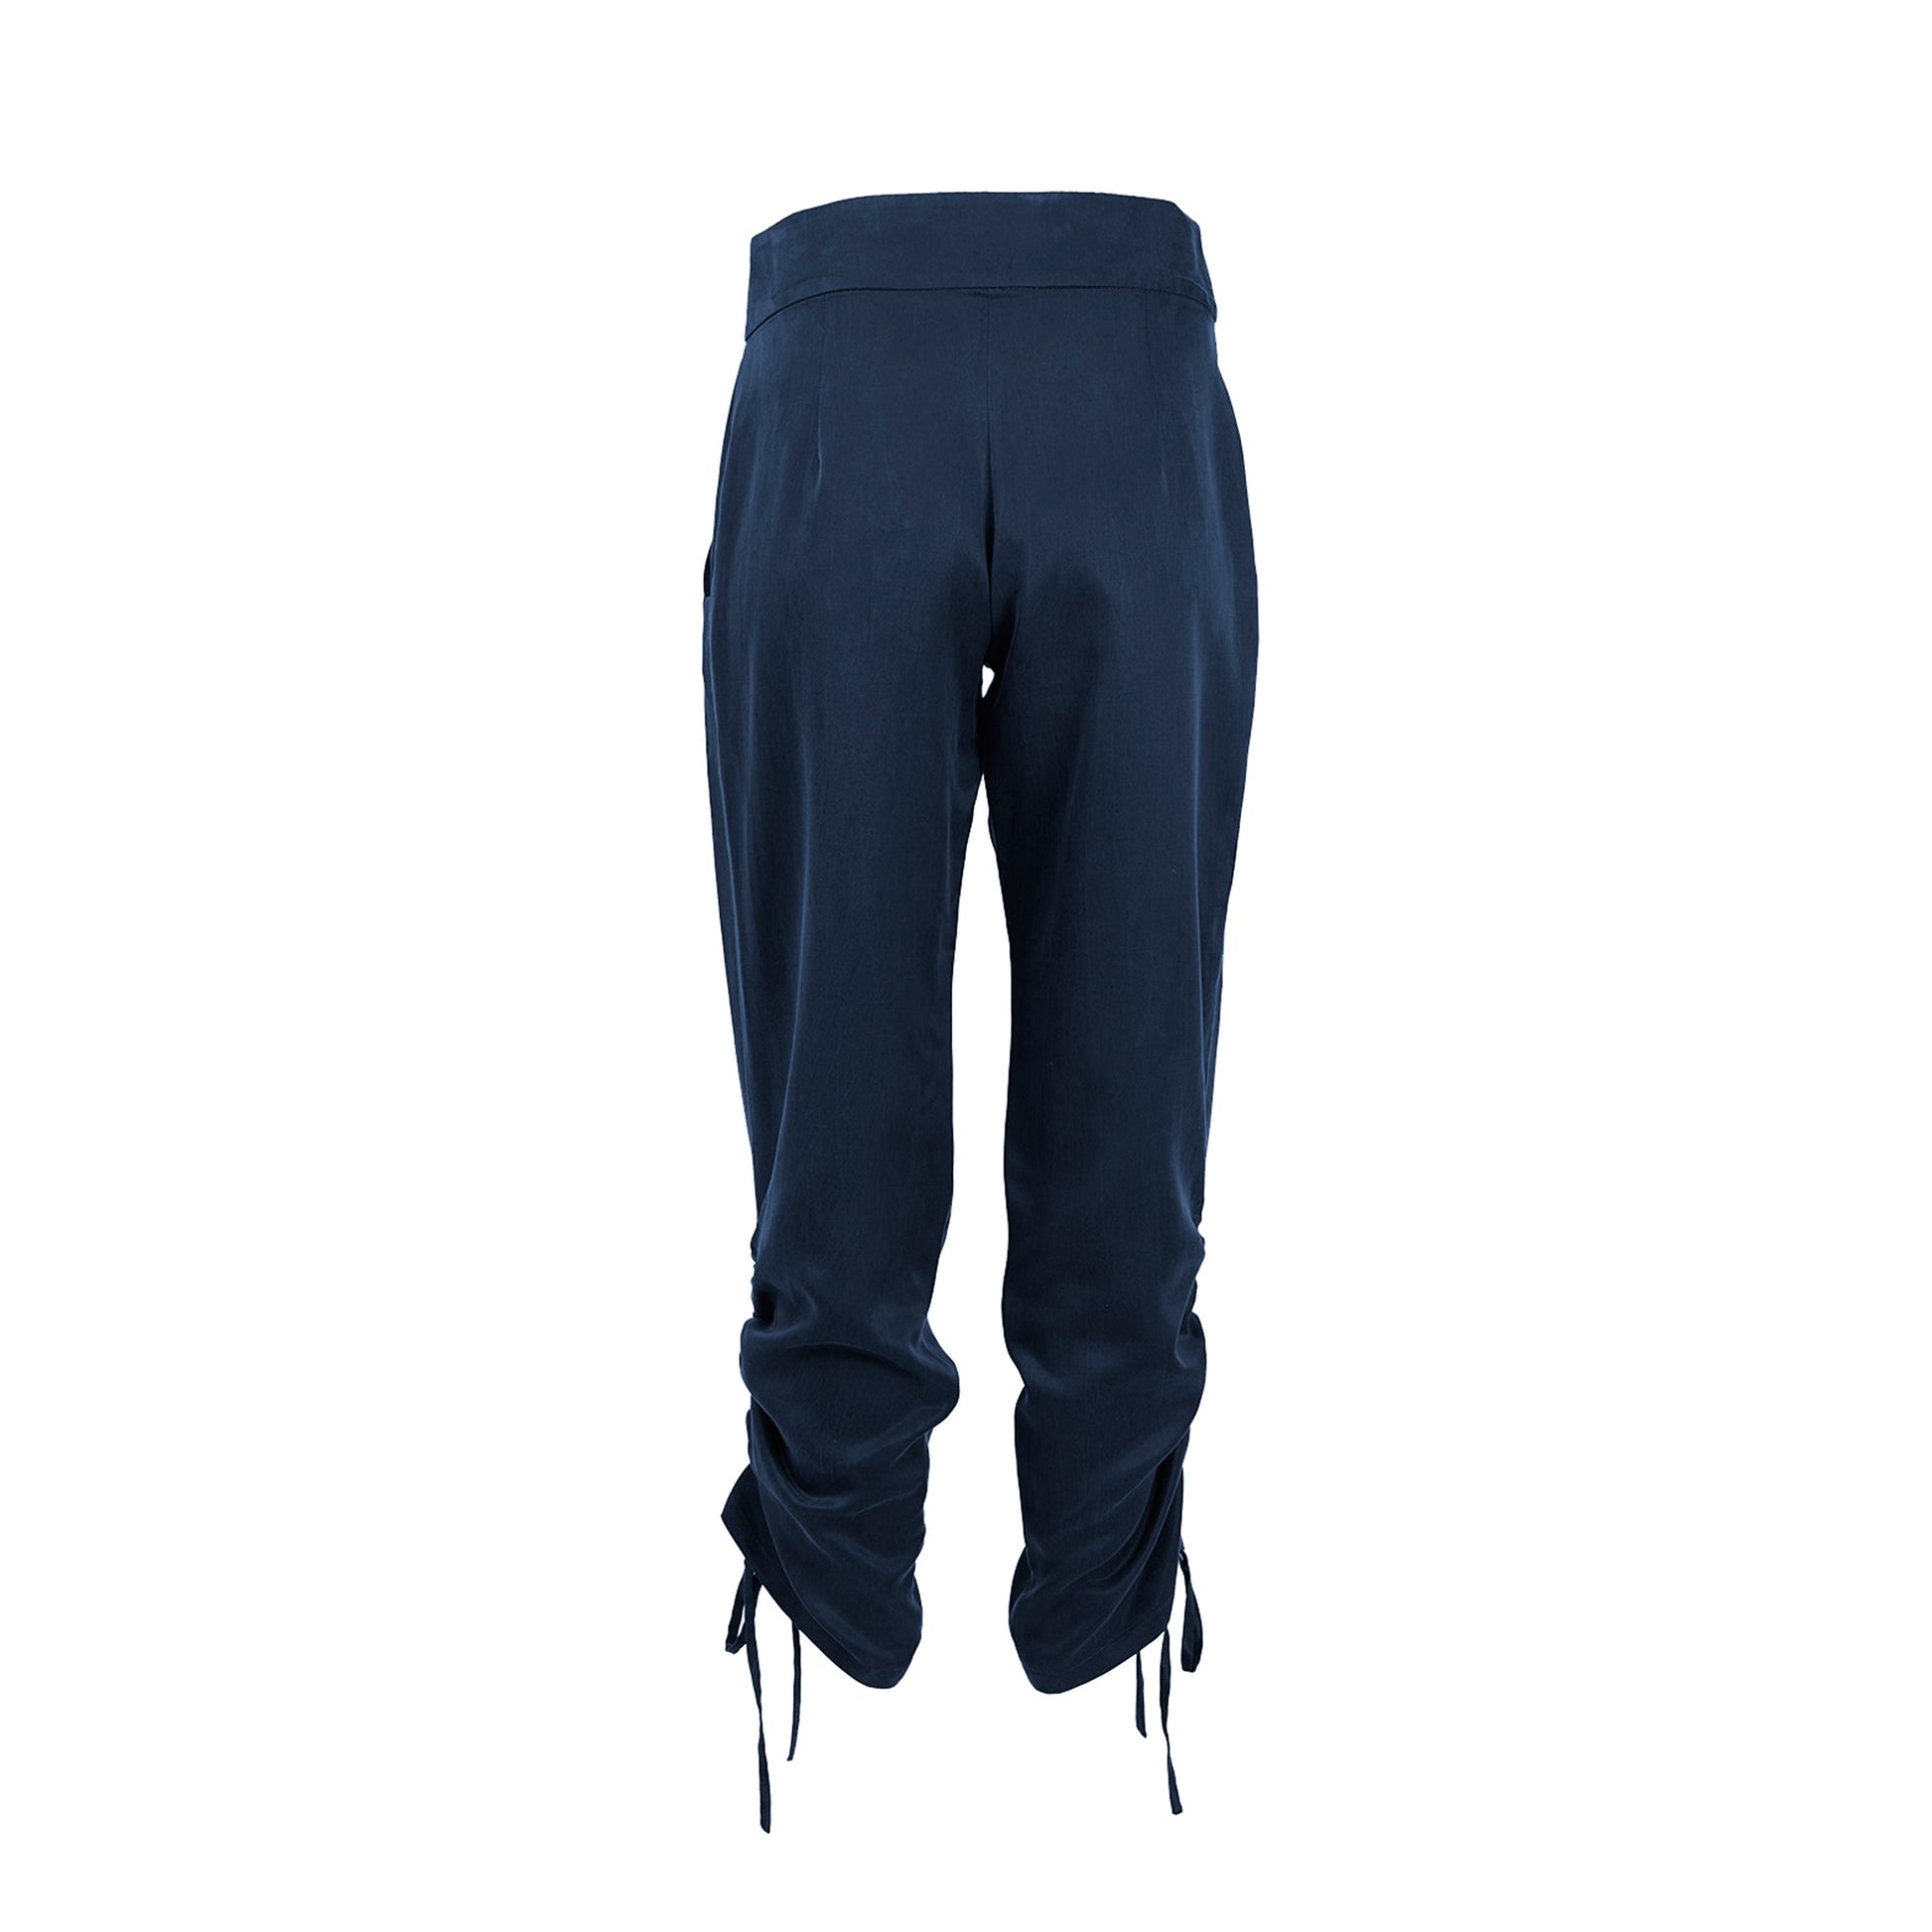 Back of pants with contoured waist band and side drawstring detail in Navy